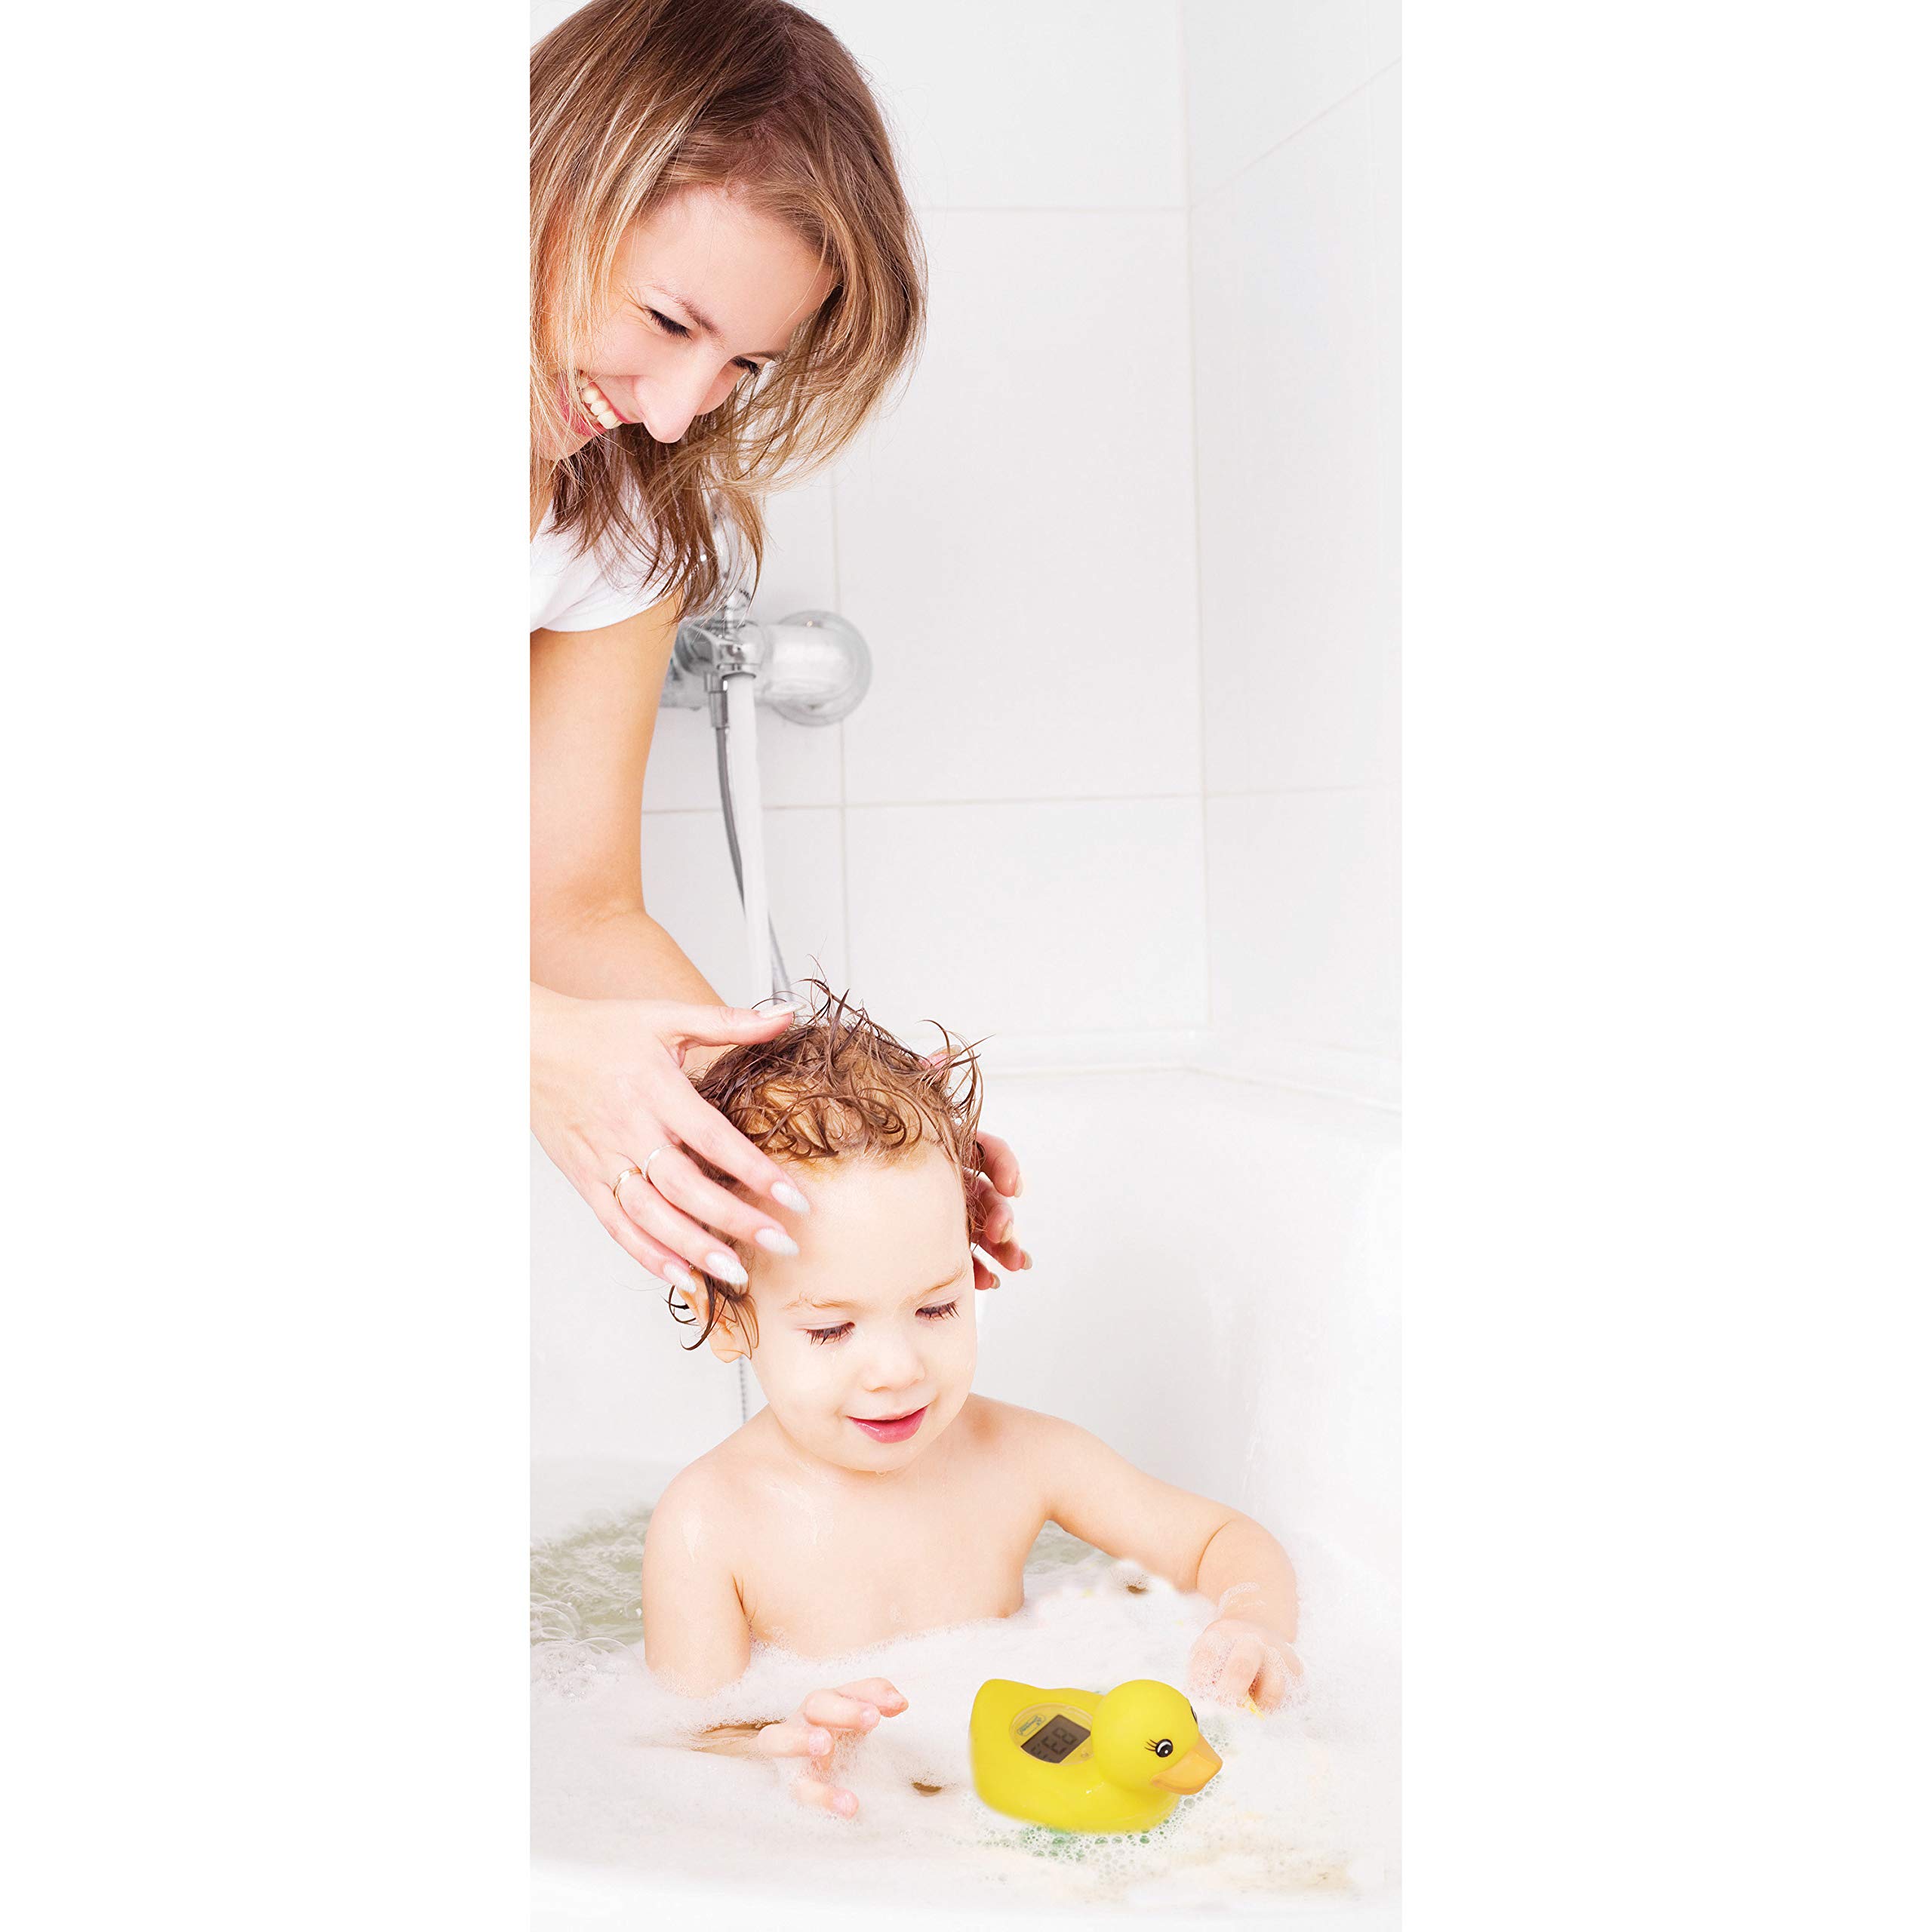 Dreambaby Baby Bath & Room Thermometer - Floating Toy Temperature Safety Monitor - Yellow Duck